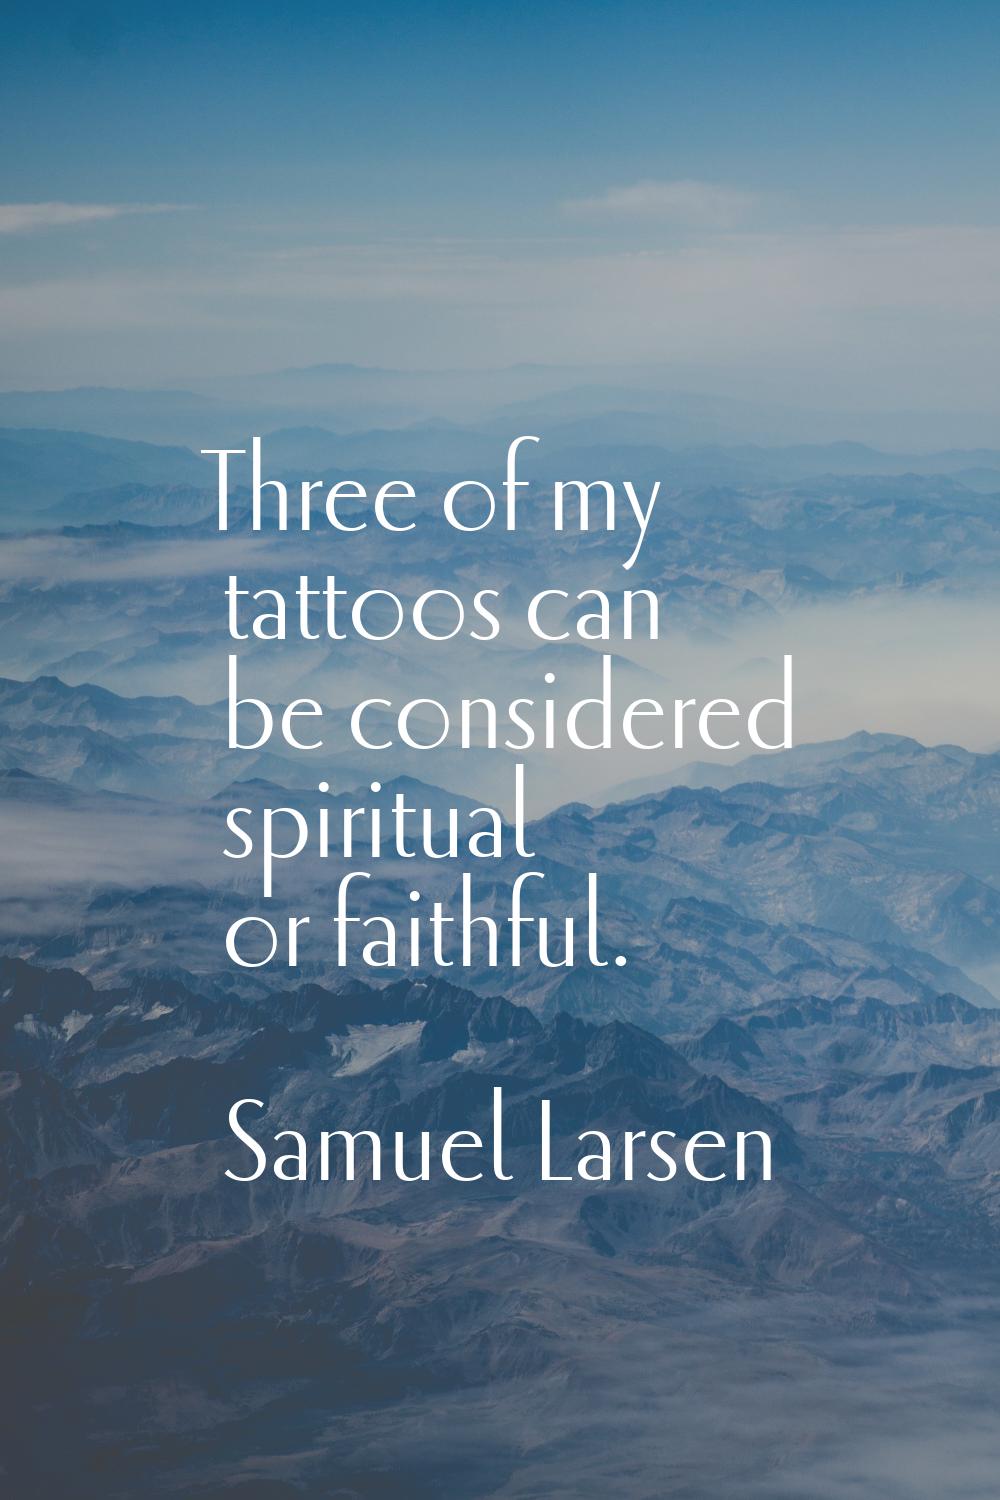 Three of my tattoos can be considered spiritual or faithful.